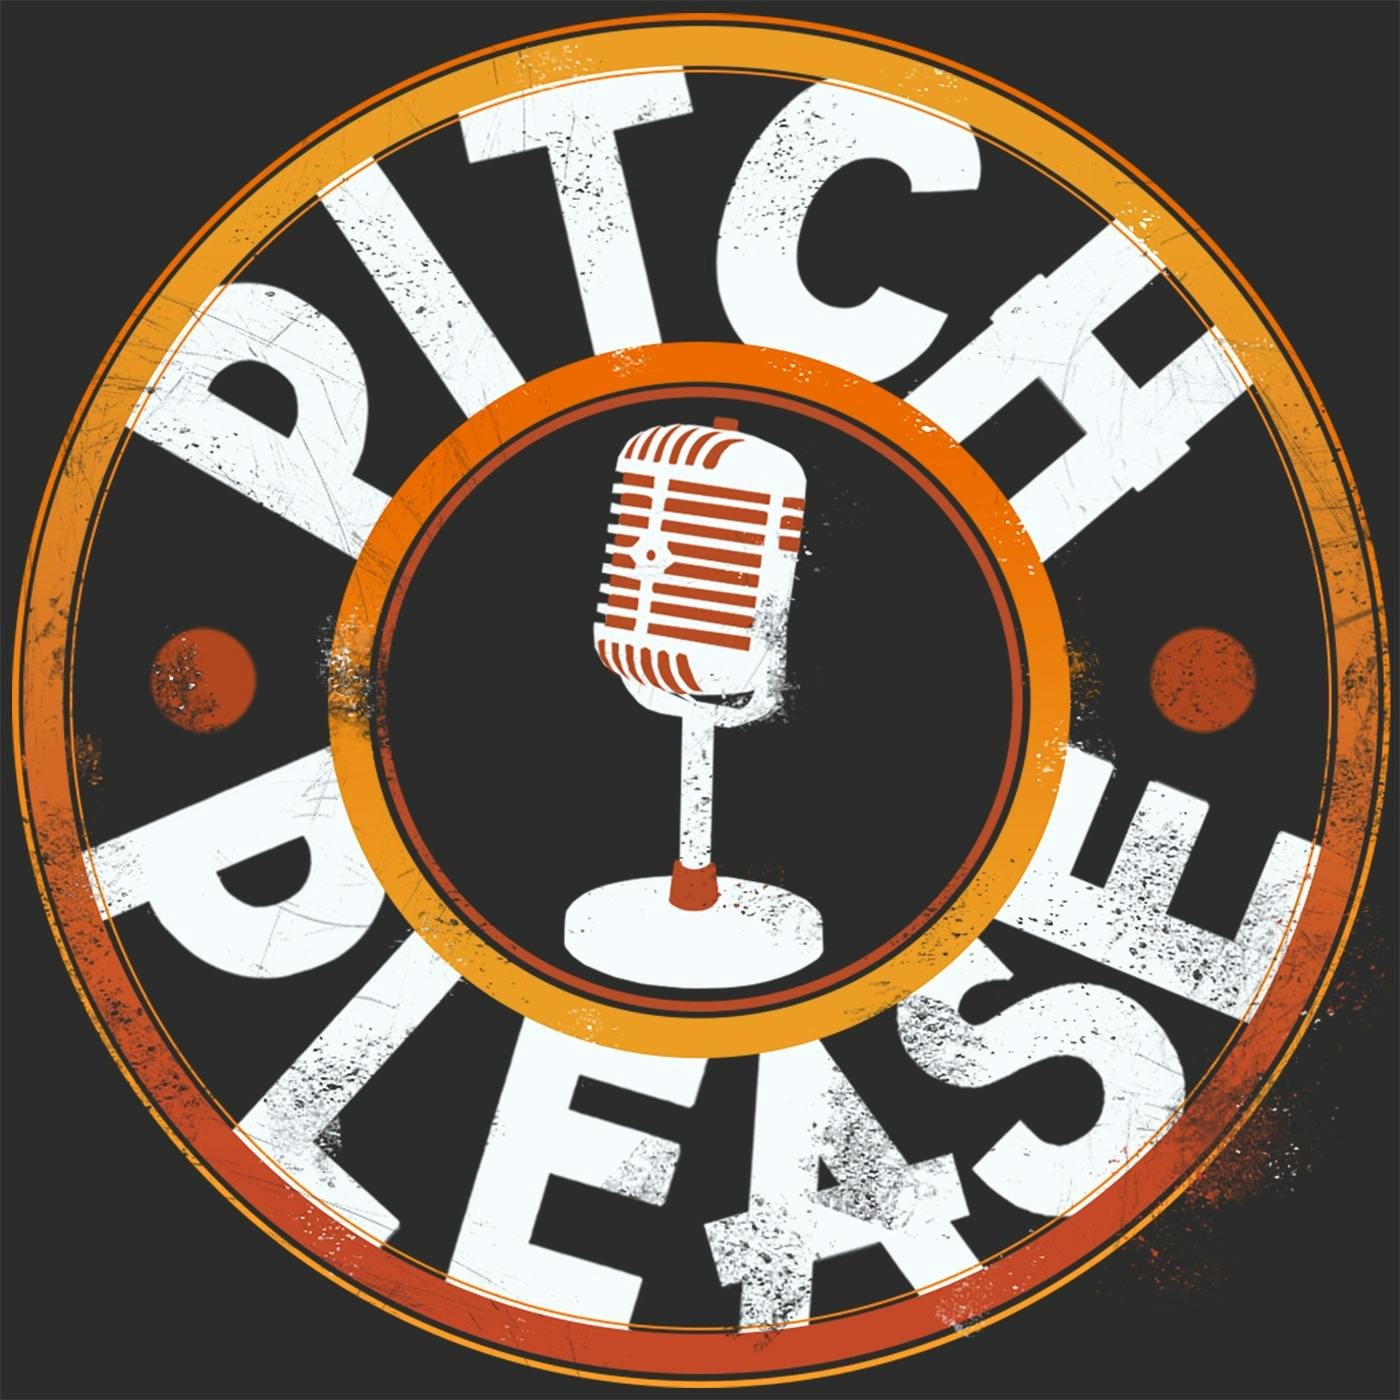 PP Awards 2020 - Pitch, Please